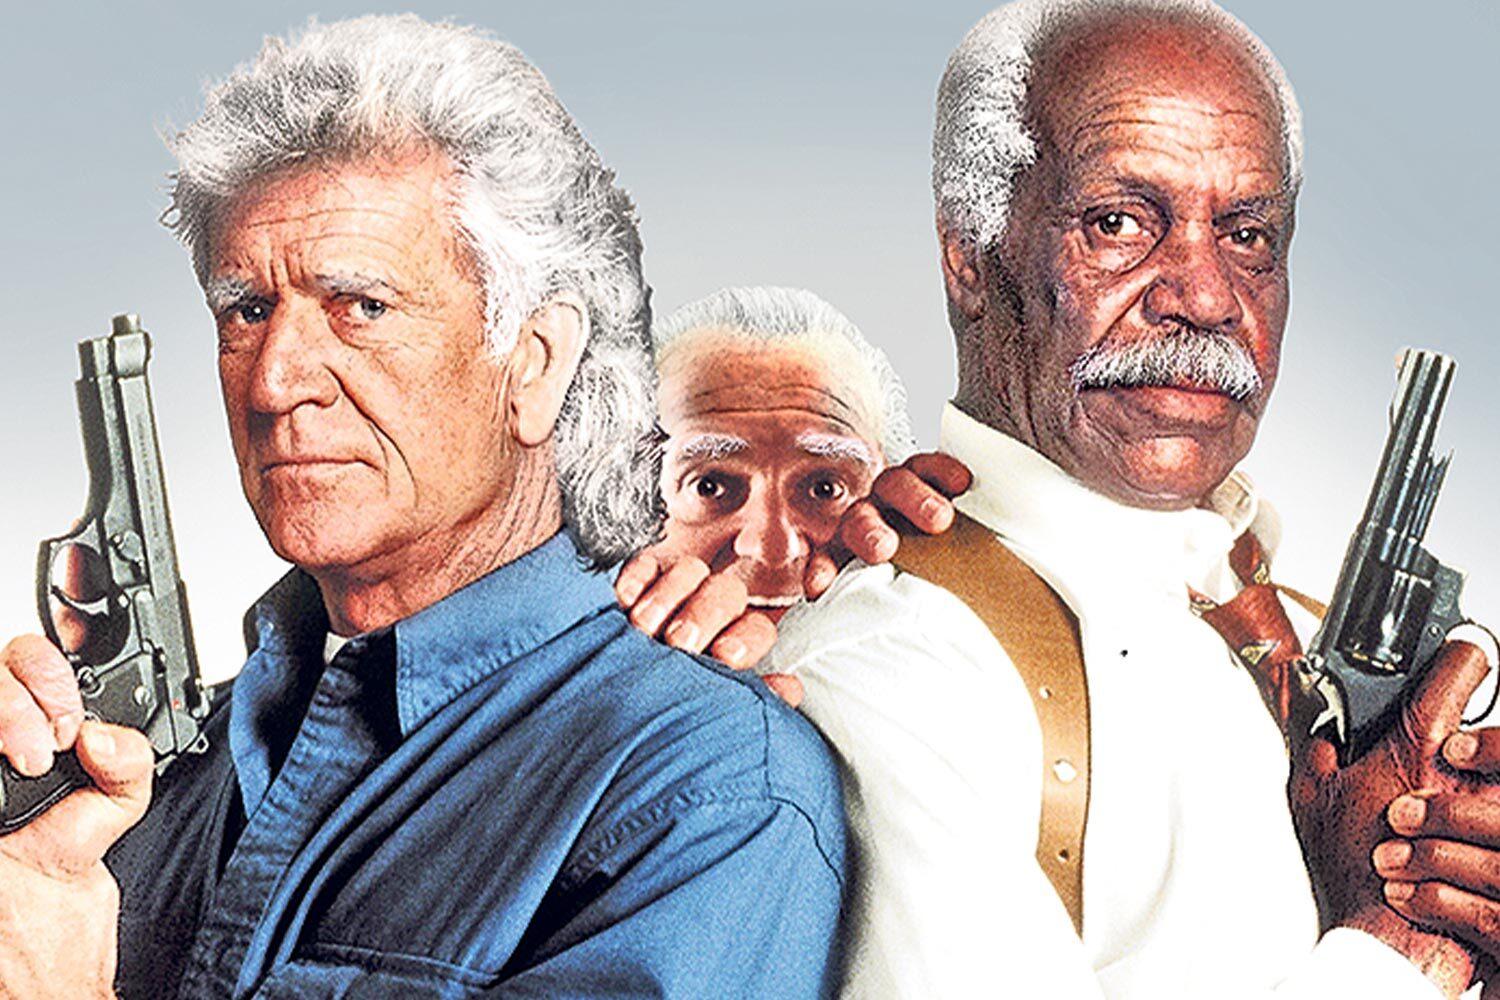 Lethal Weapon 5 still coming from Mel Gibson The Movie Blog